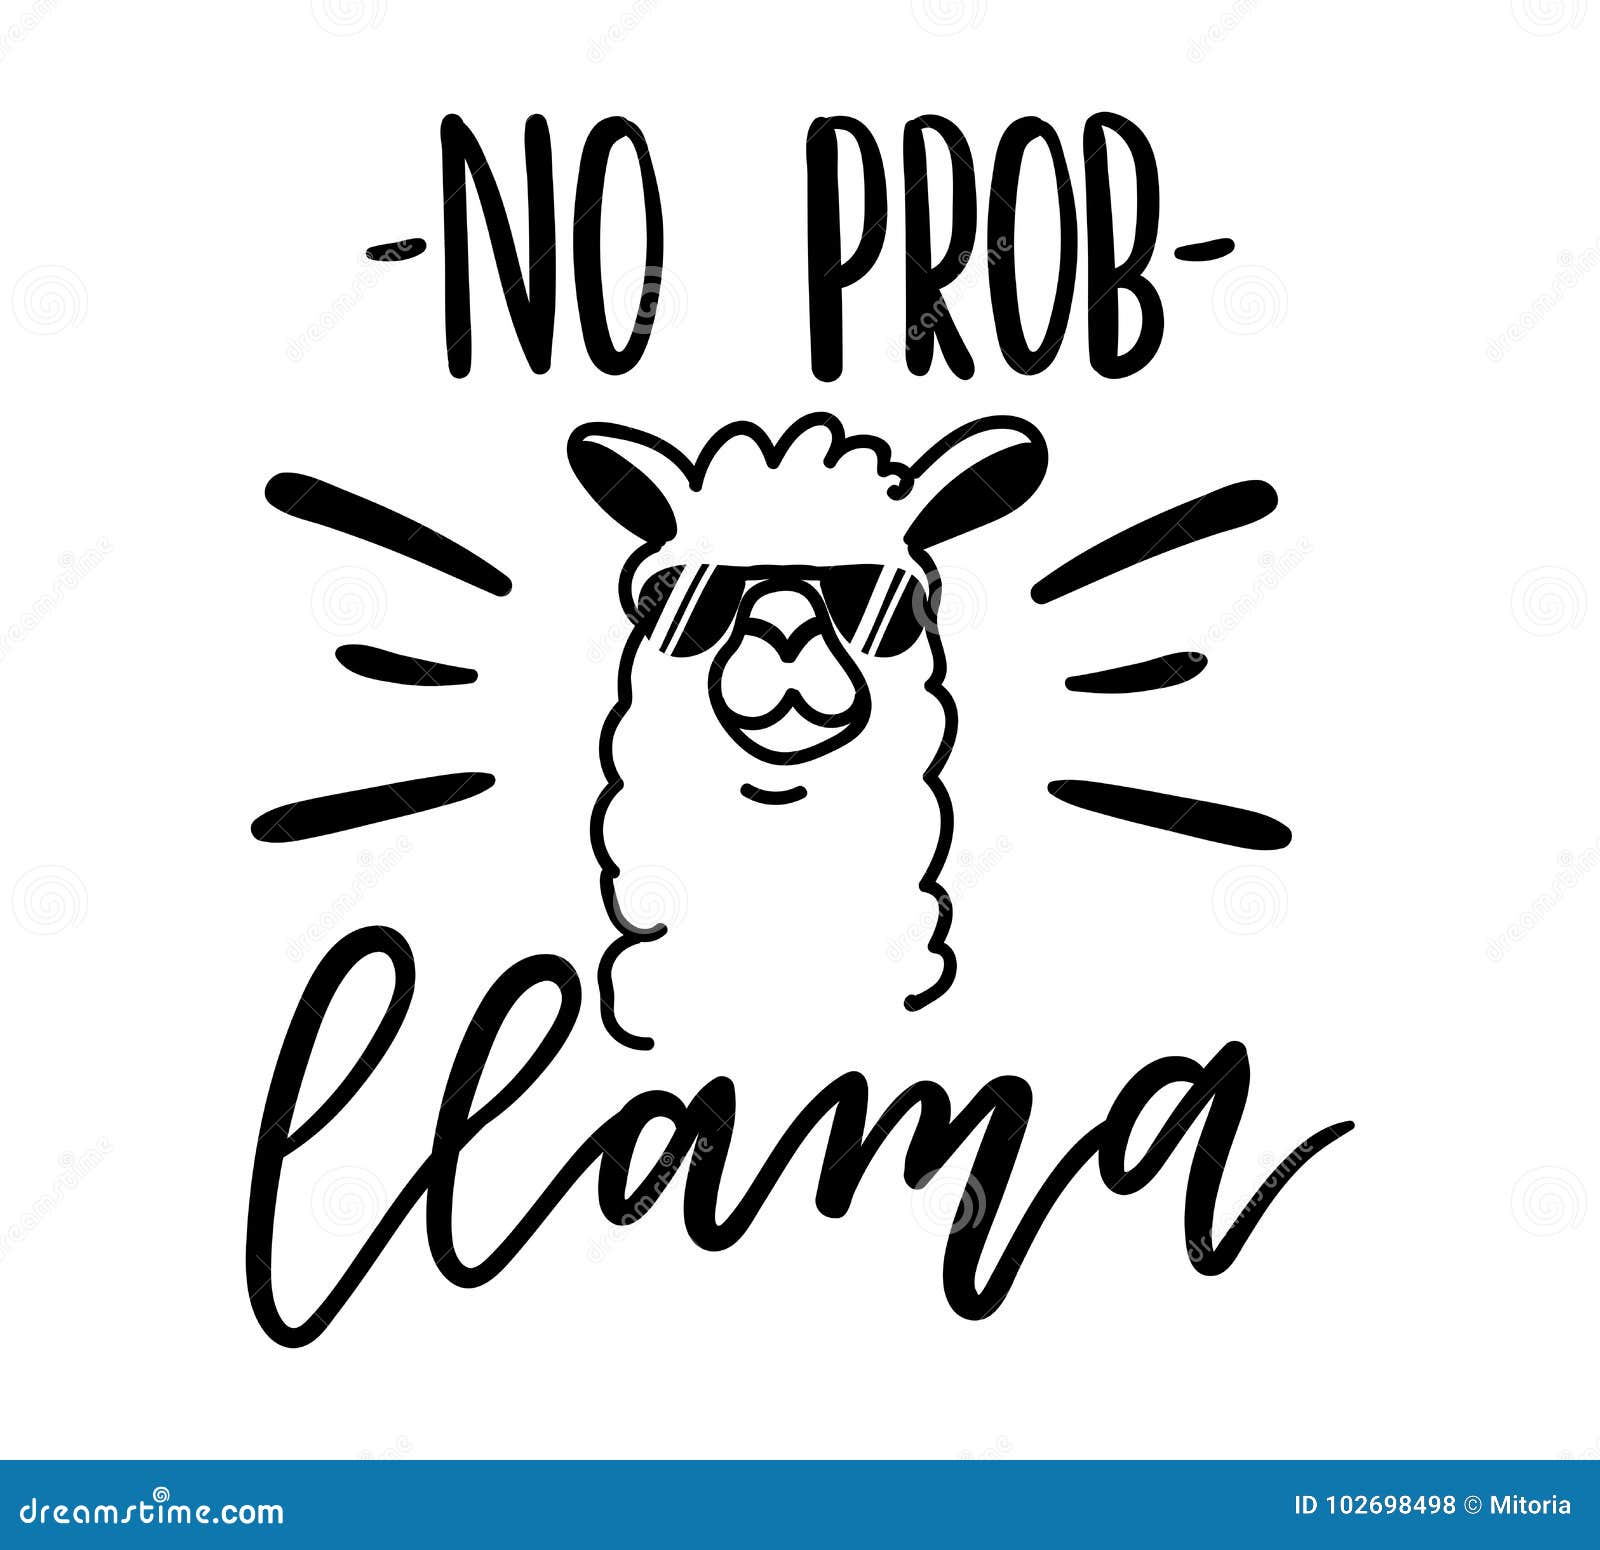 llama quote with doodles. no prob llama motivational and inspirational quote.